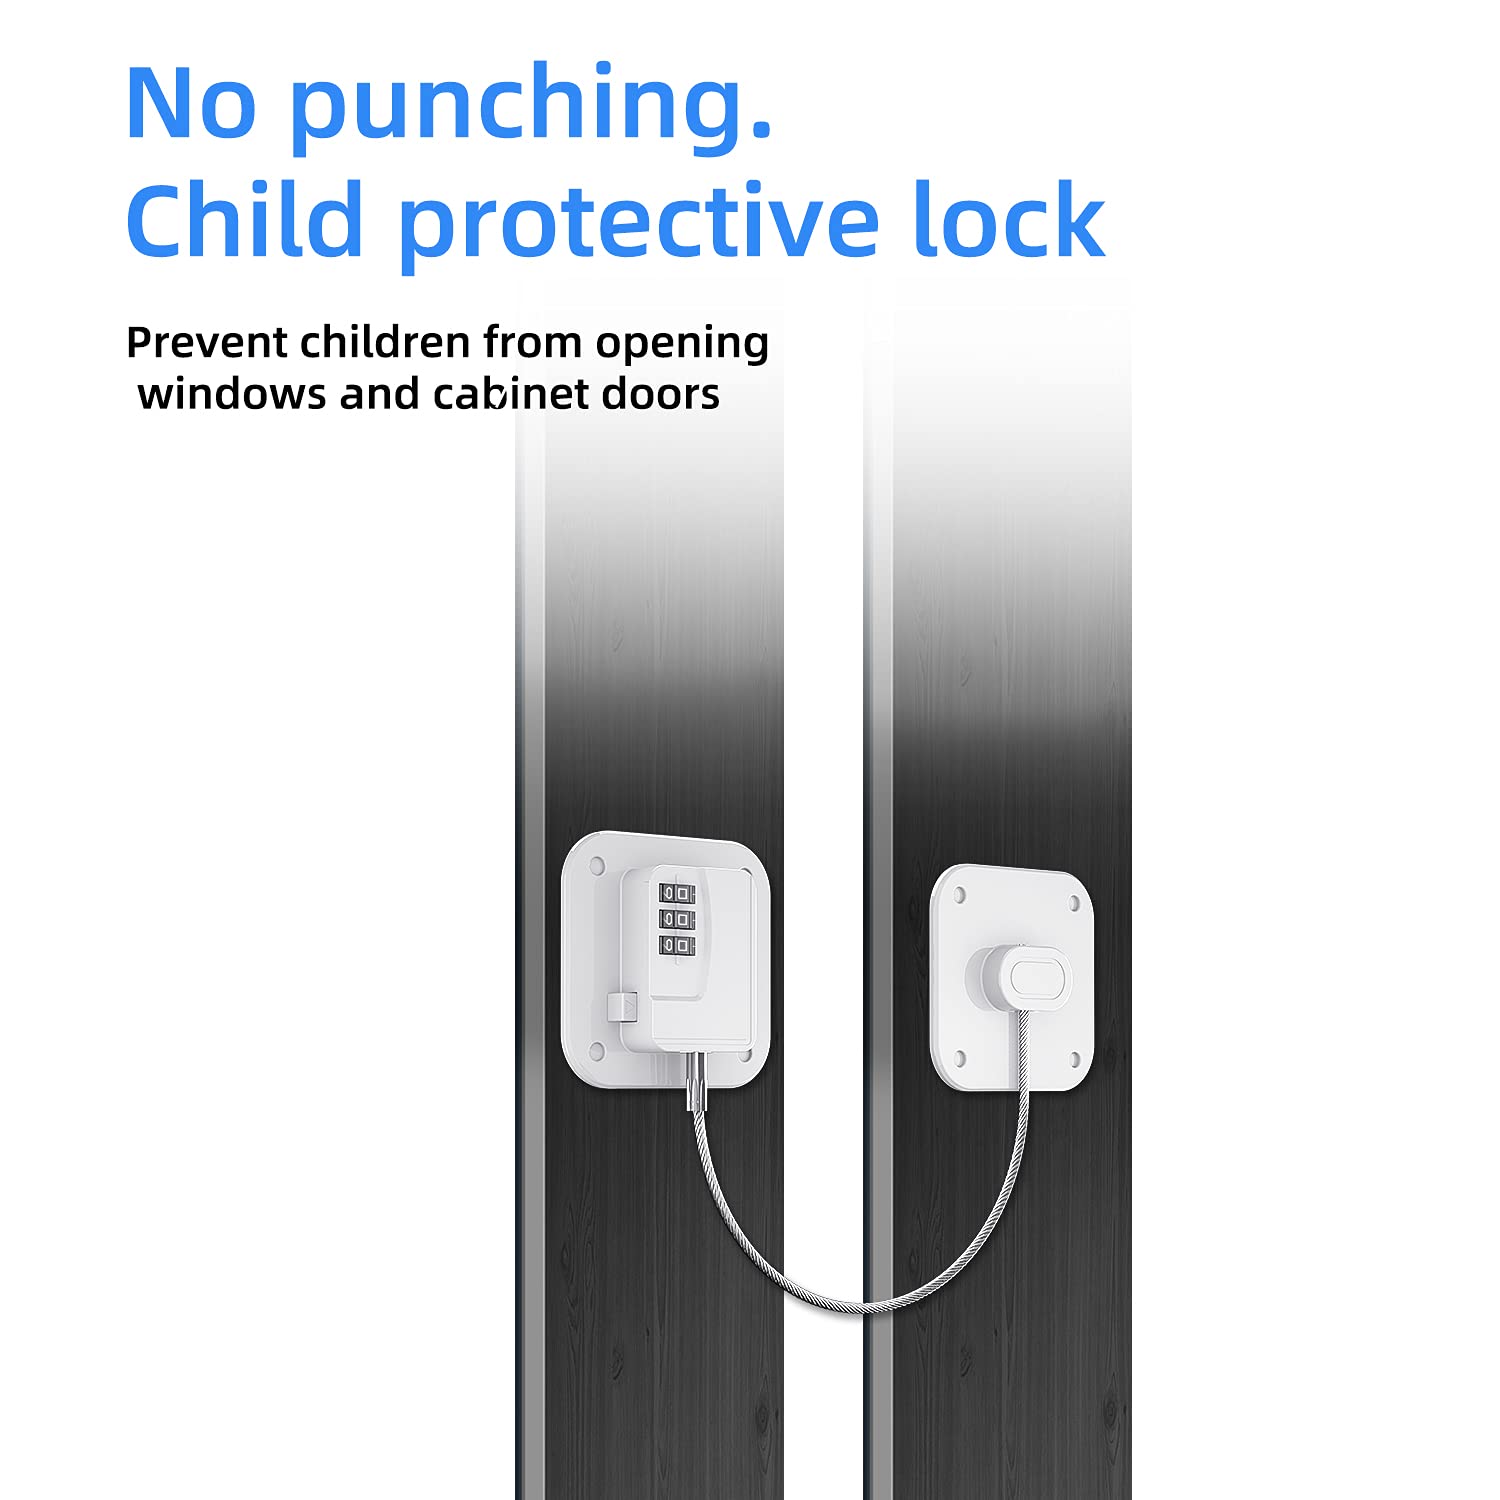 2 Packs Refrigerator Lock - Heavy Duty Combination Fridge Lock, Child/Baby Proofing Lock for Cabinets, Closets, Drawers, Window and More, Easy Install and Use (White)